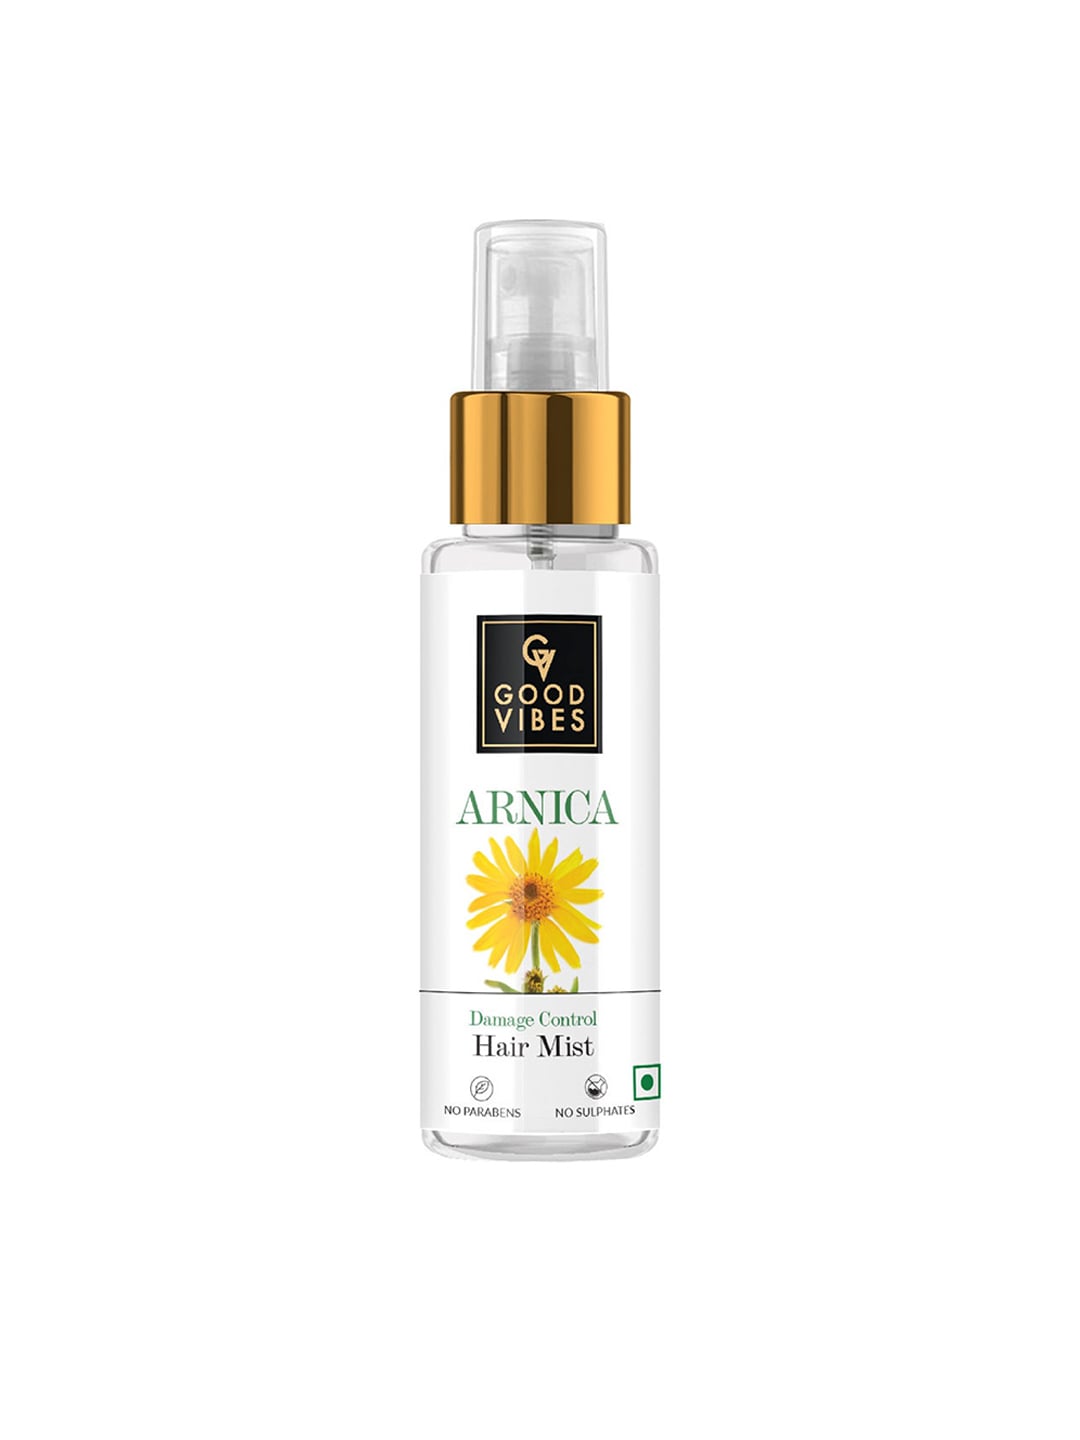 Good Vibes Transparent Damage Control Hair Mist - Arnica 50ml Price in  India, Full Specifications & Offers 